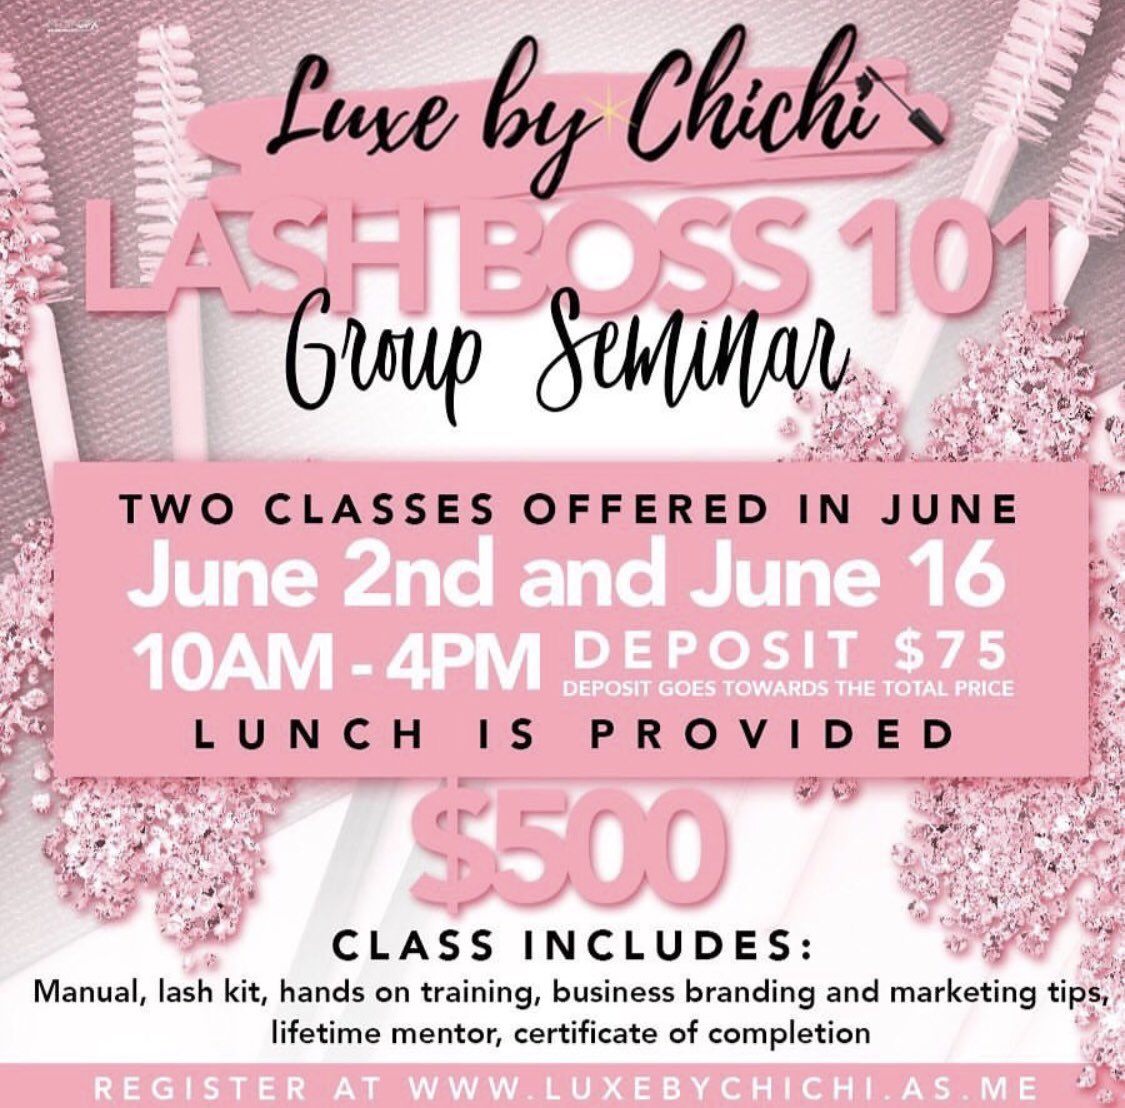 Want to be a lash tech? Luxe by ChiChi has the BEST education! Become your own boss and lash the proper way💕 #dmvlashes #dmvlashtraining #757lashes #rvalashes #minklashtraining #lashed #lashtraining #dmvmua #mua #atllashes